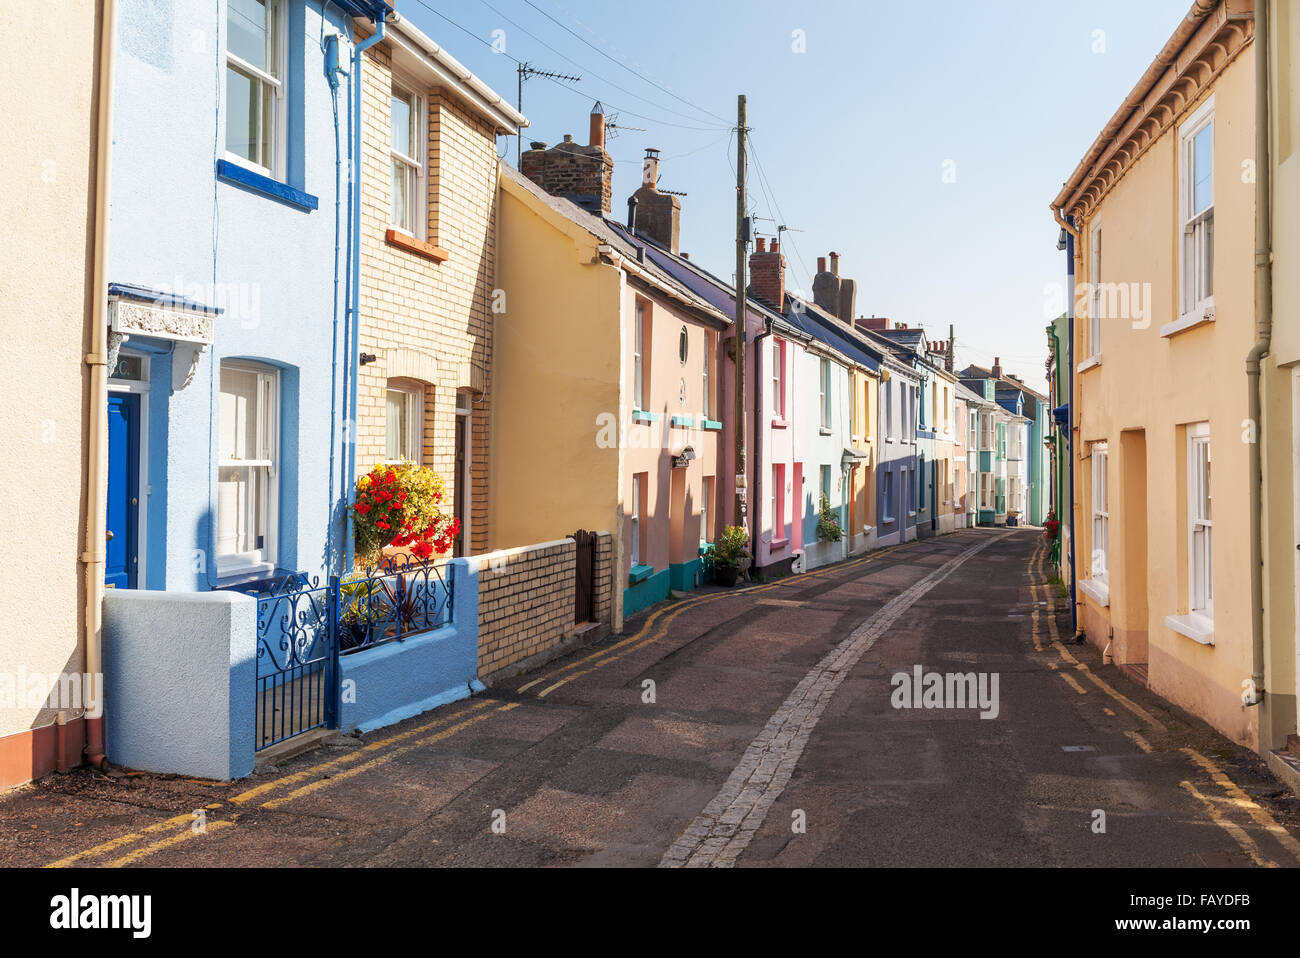 Multi-Coloured, Terraced Houses on a Street in Appledore, North Devon, UK Stock Photo